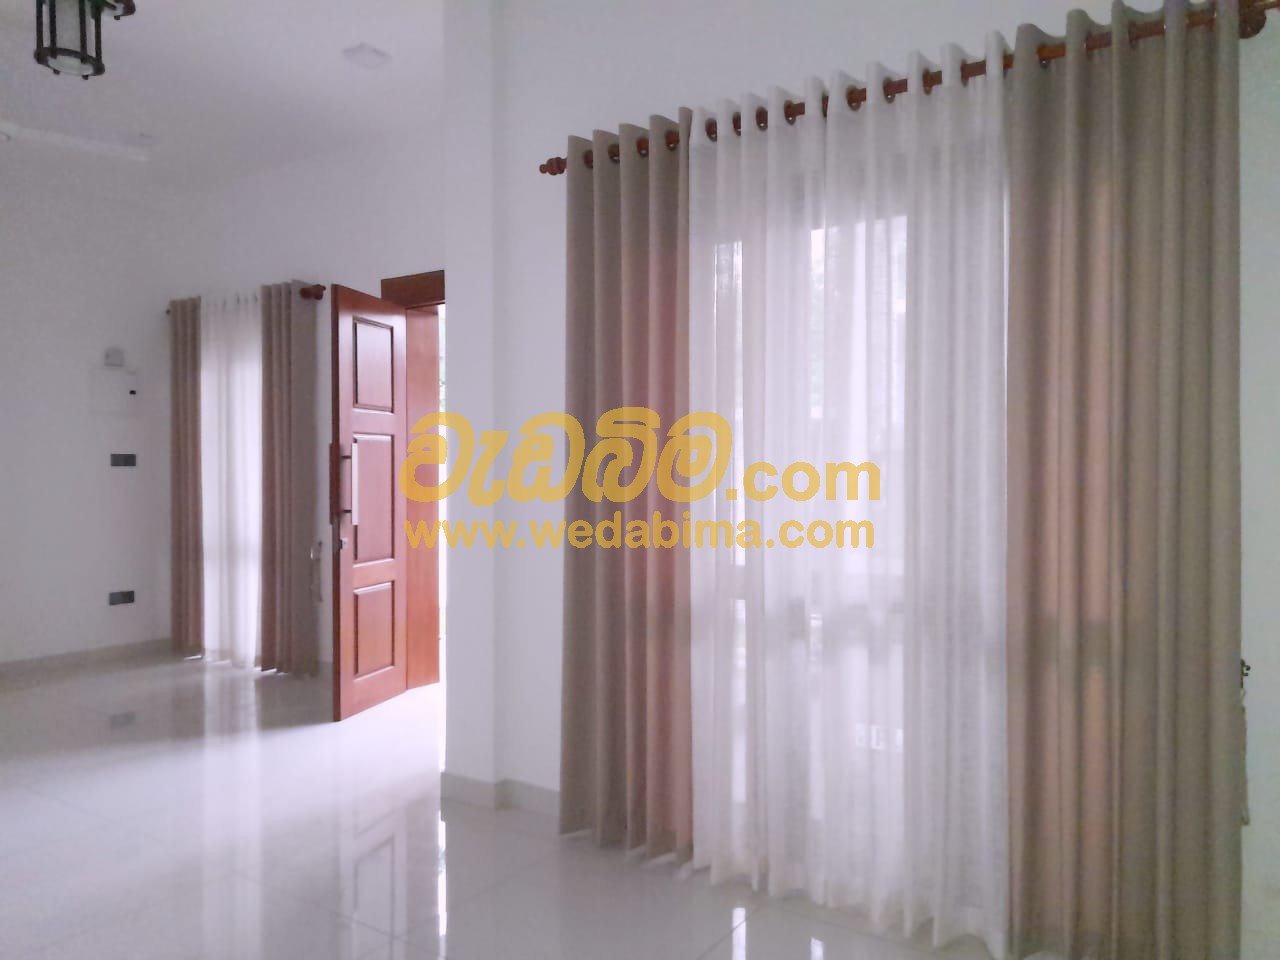 Sri Lankan Curtains Suppliers and Manufacturers